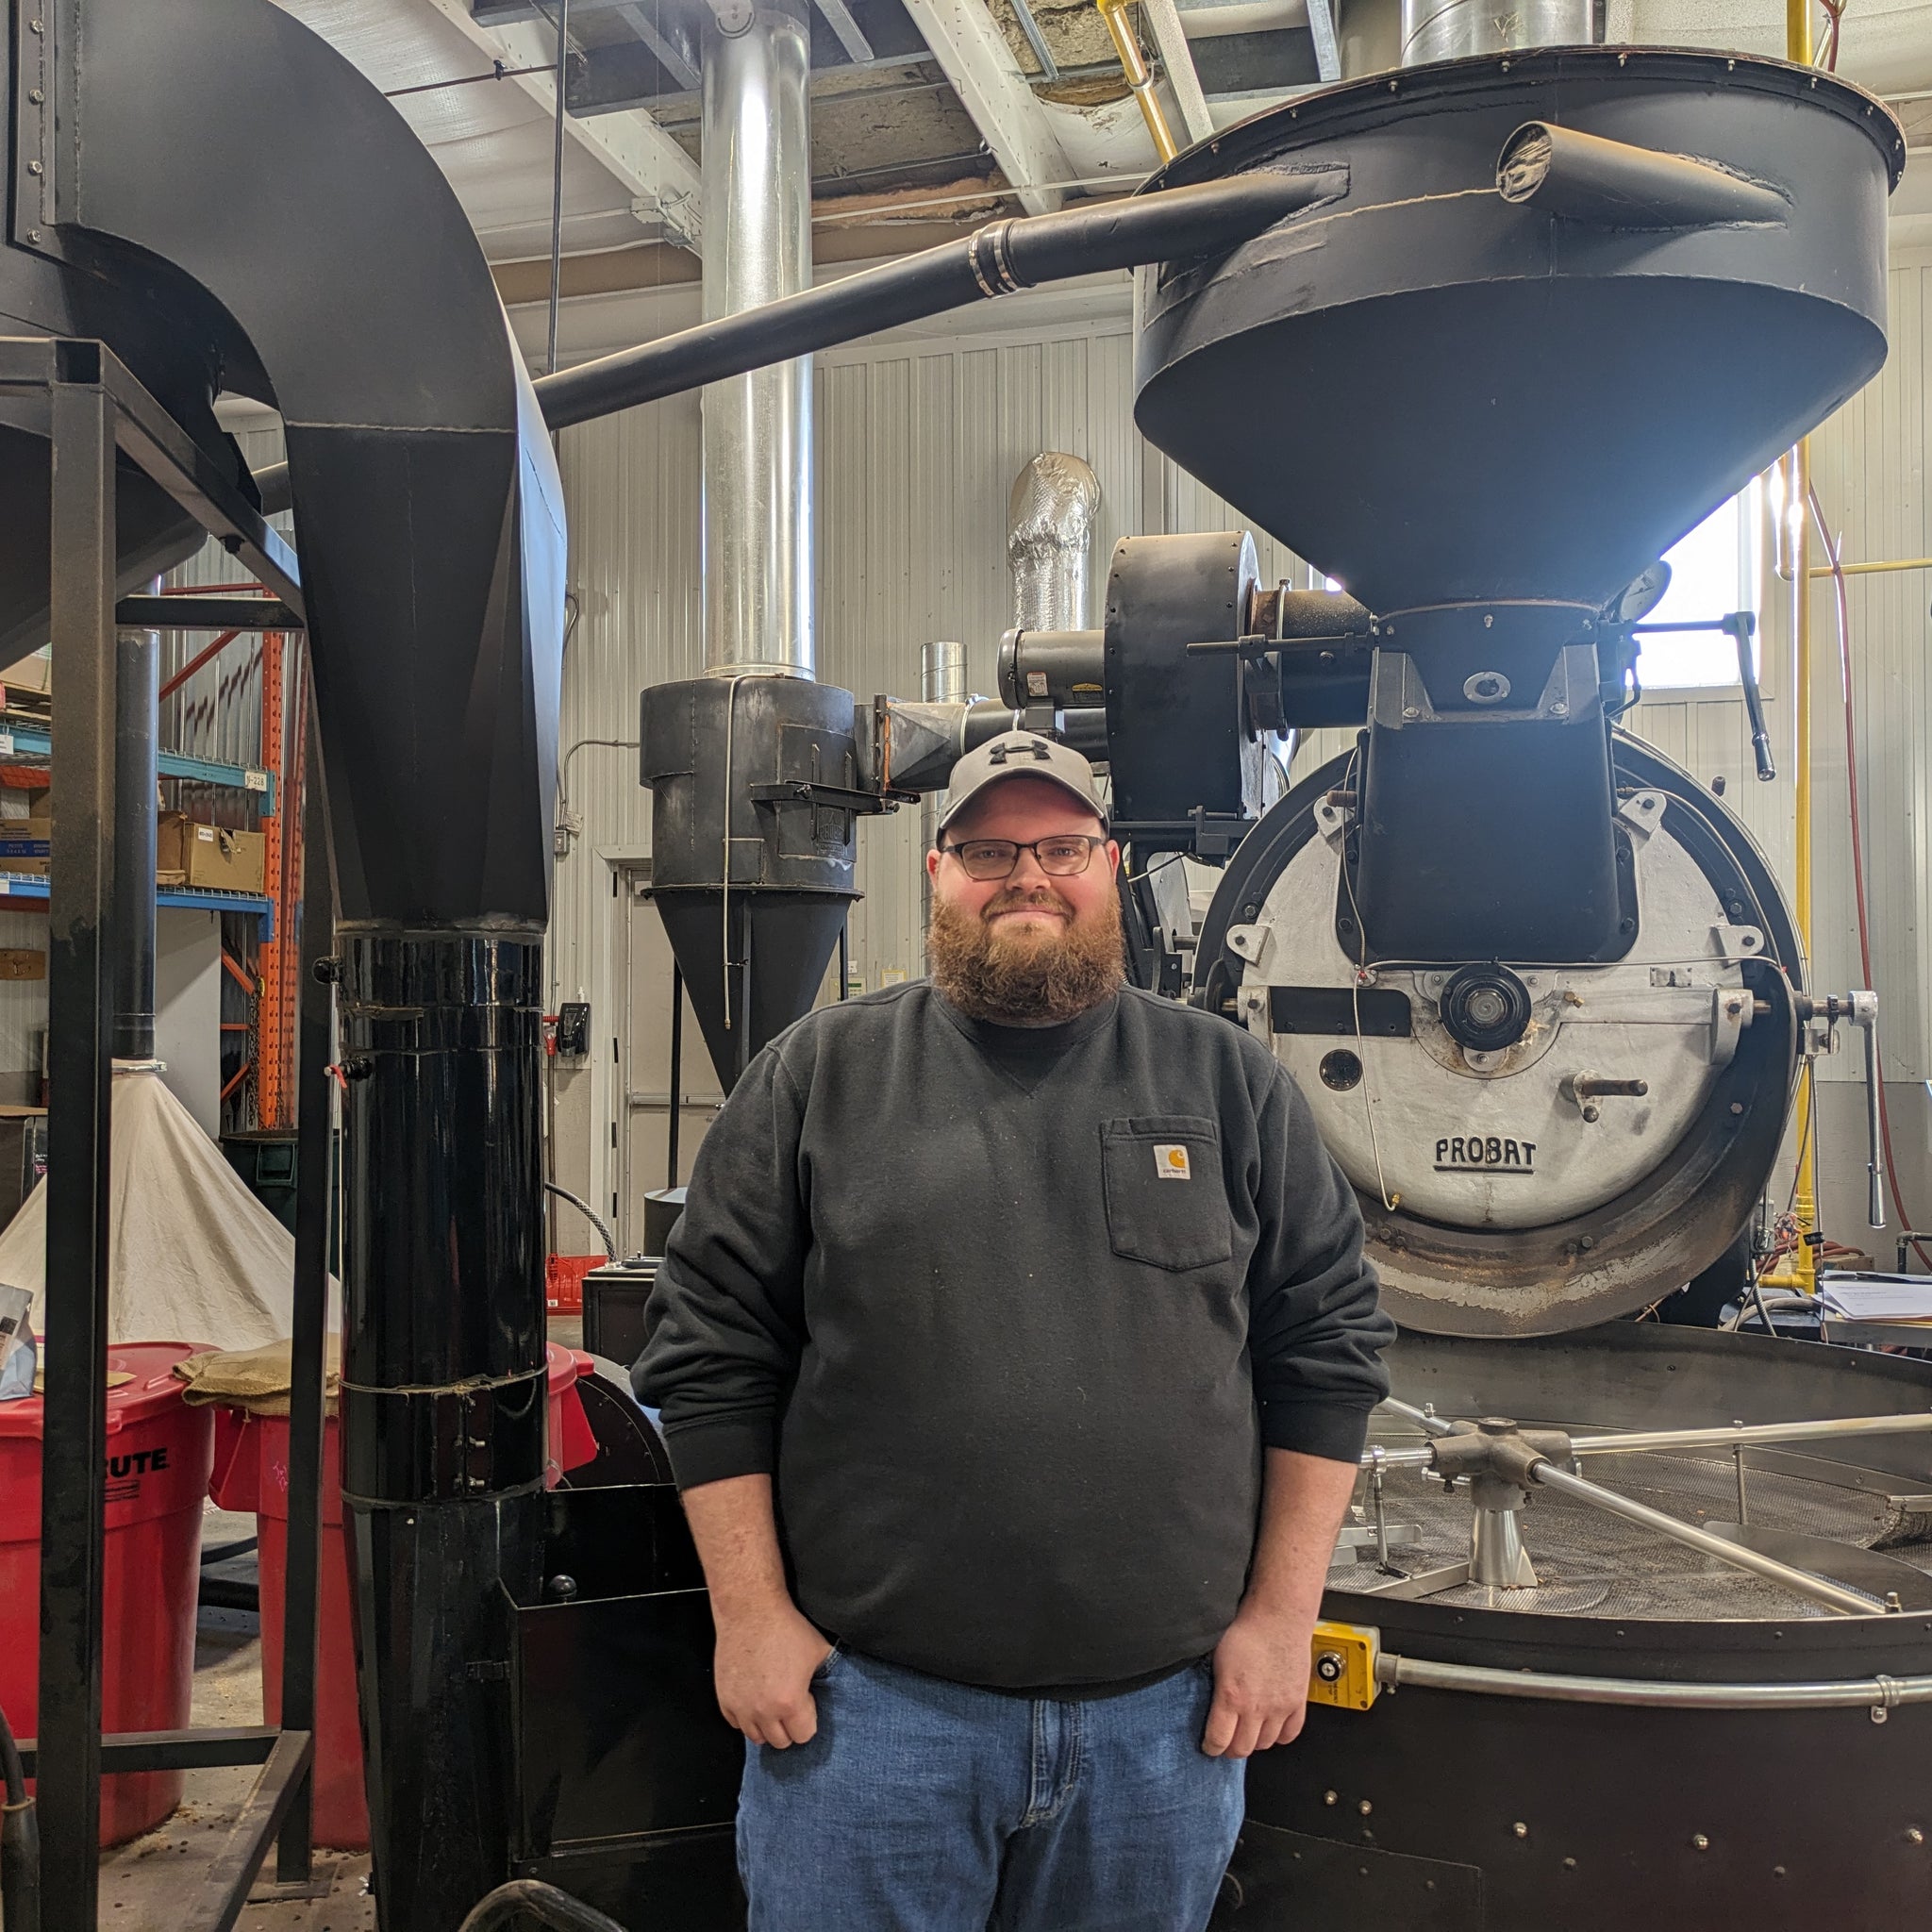 A Day In The Life Of A Roaster With Justin Houle